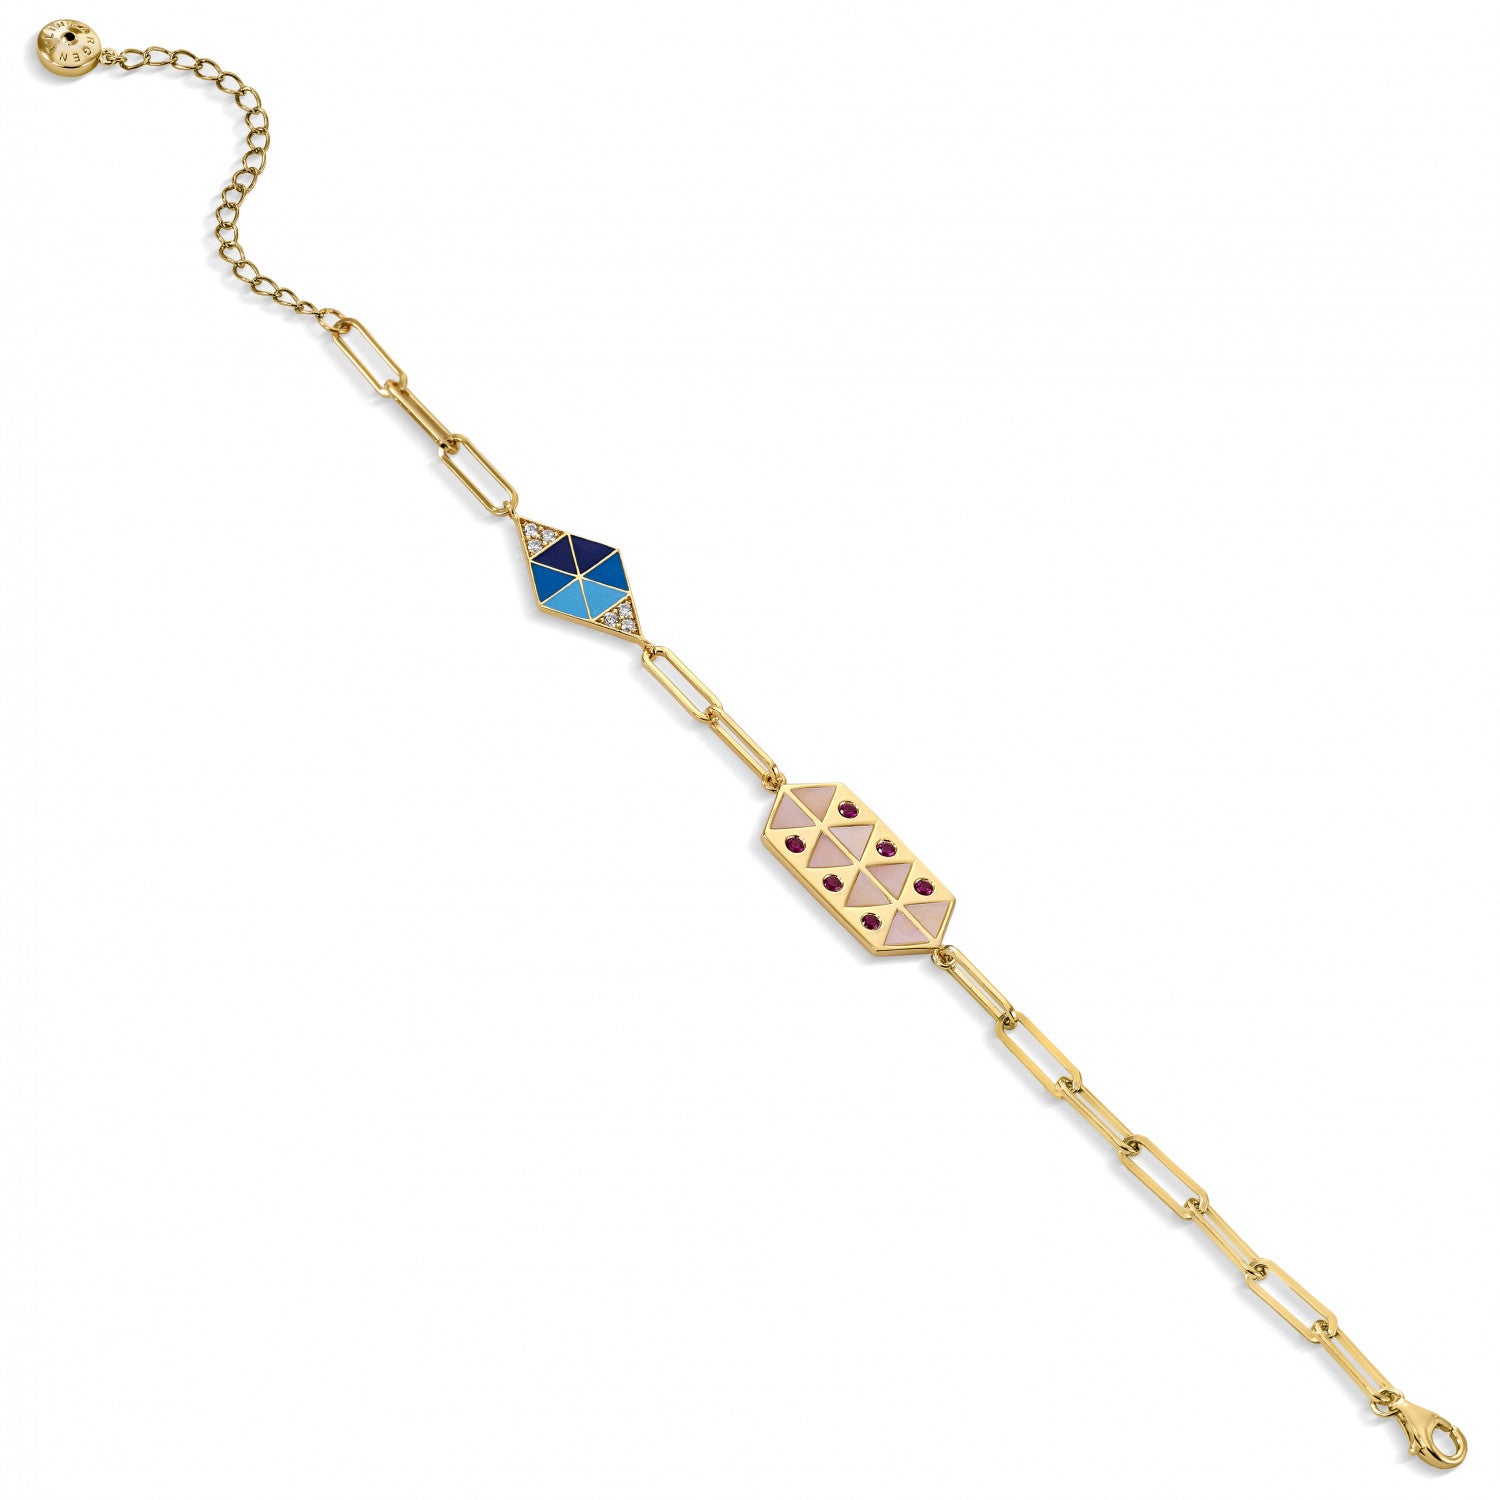 Gold plated silver link bracelet with enamel and zirconia design